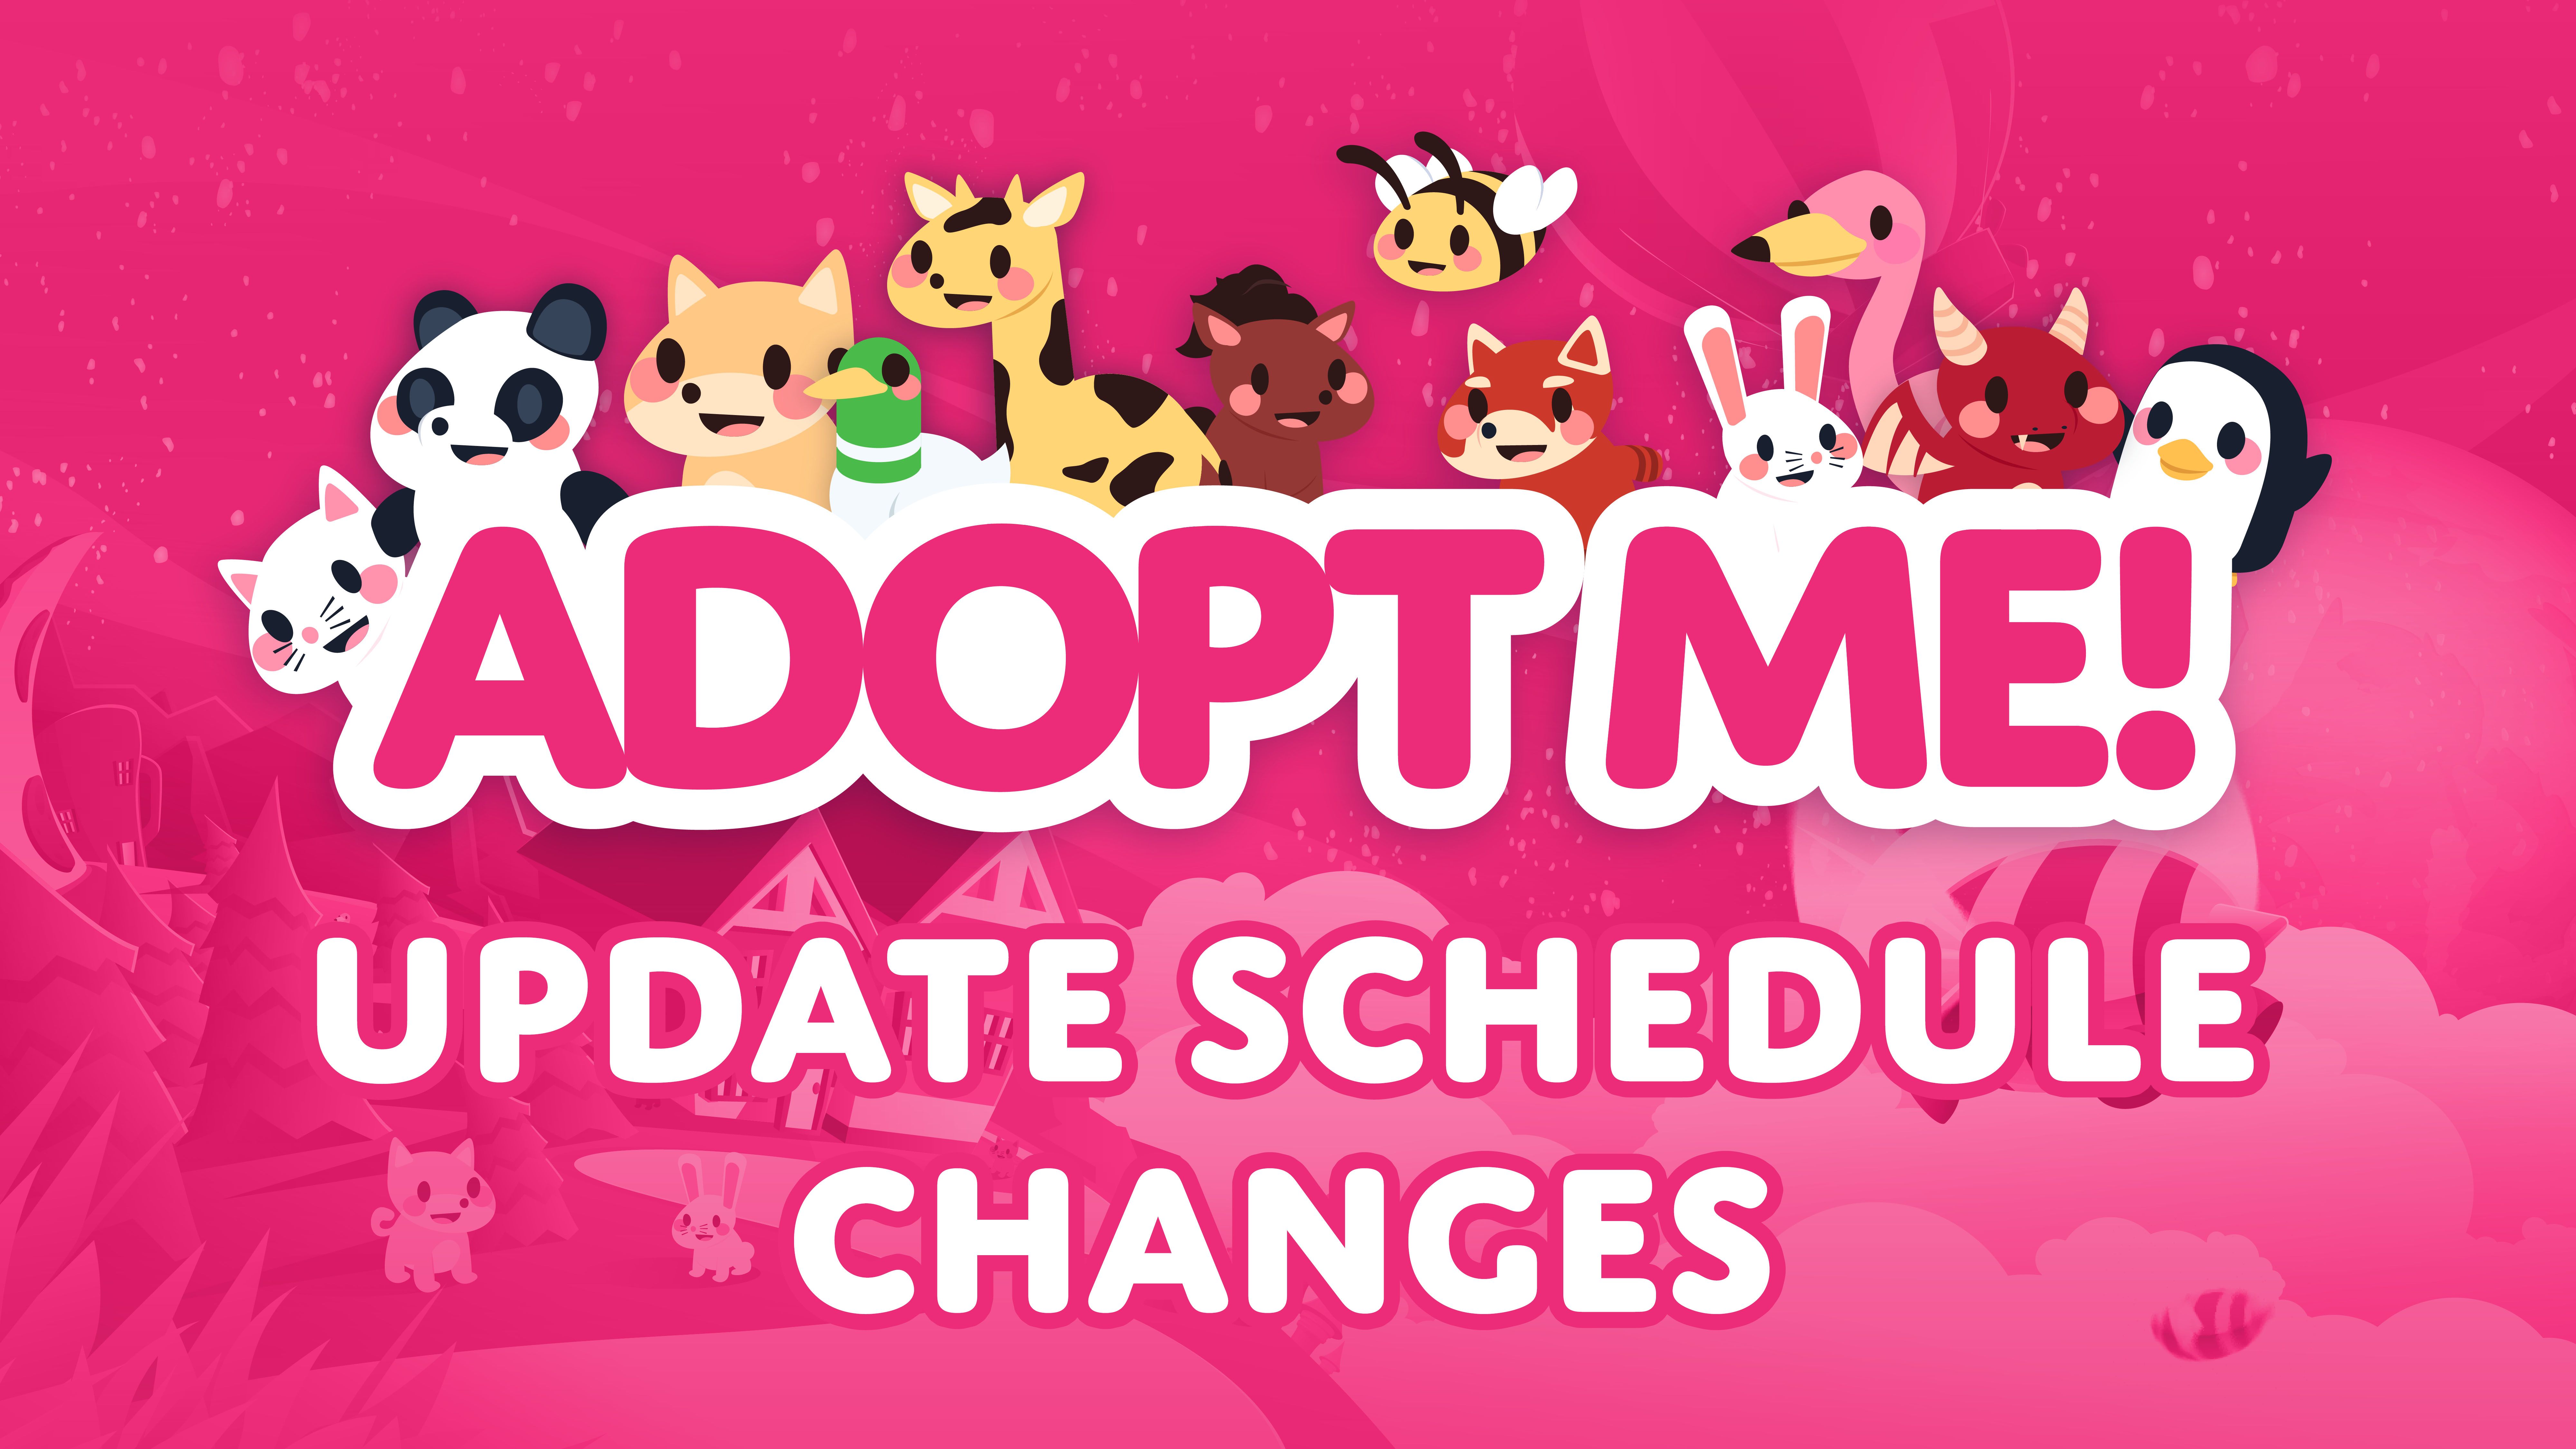 A bunch of pets on top of adopt me logo with text about schedule changes. 